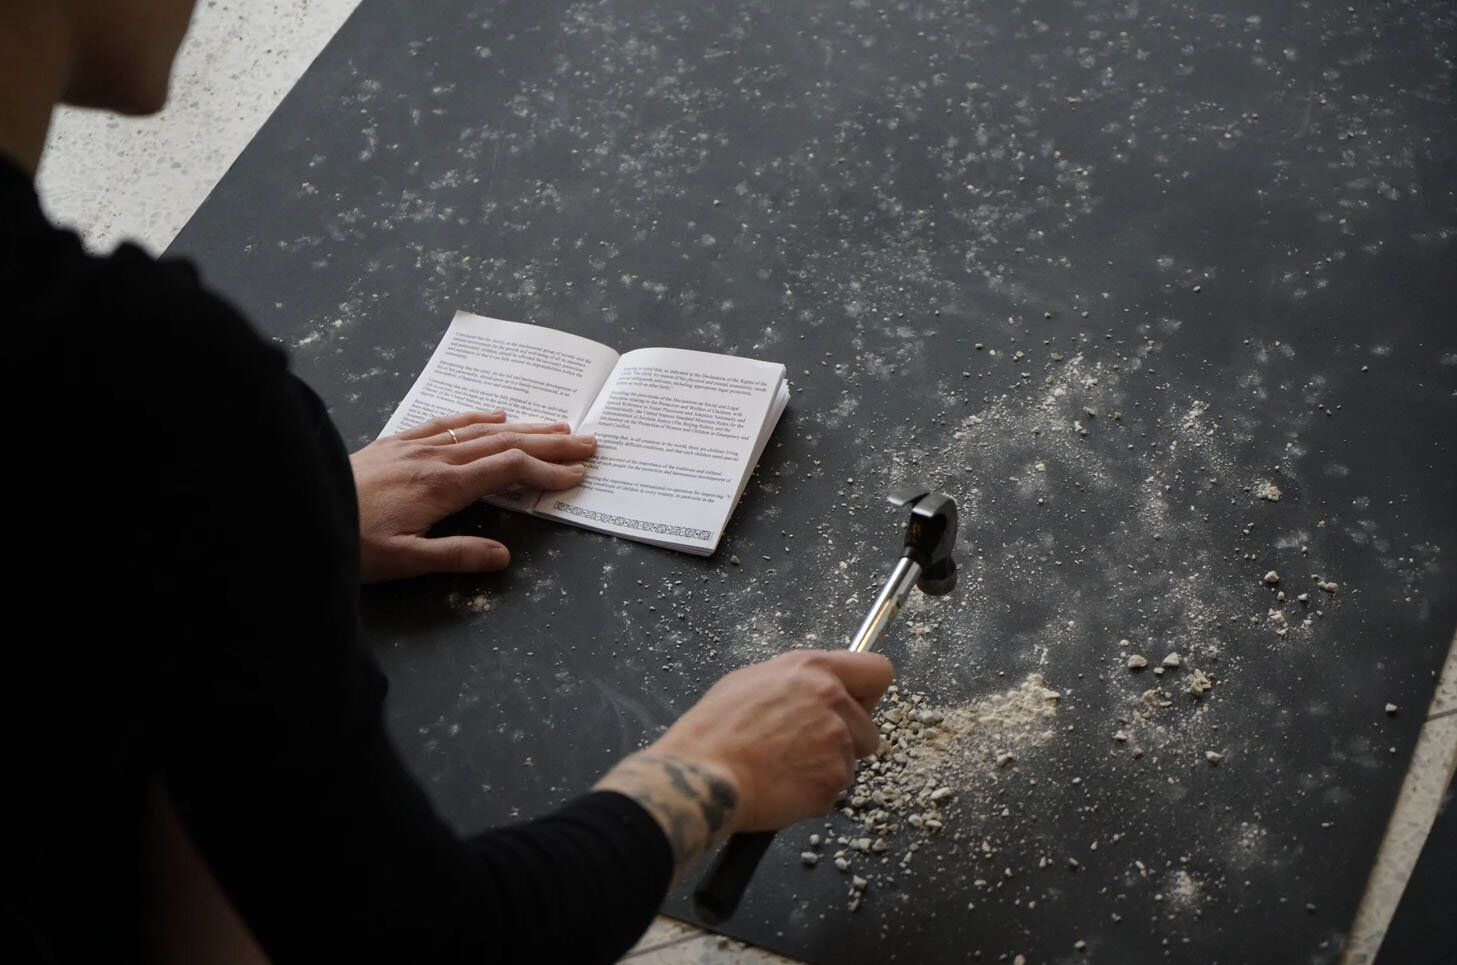  Rachel Lindsay-Snow, Constellation, Installation (Rocks, The UN Convention on the Rights of the Child booklet, hammer, matte board, pinch pots, brush, paper, human), 2019.  Notes: The following three tasks are done constantly for 8-hours:  1. Hammer